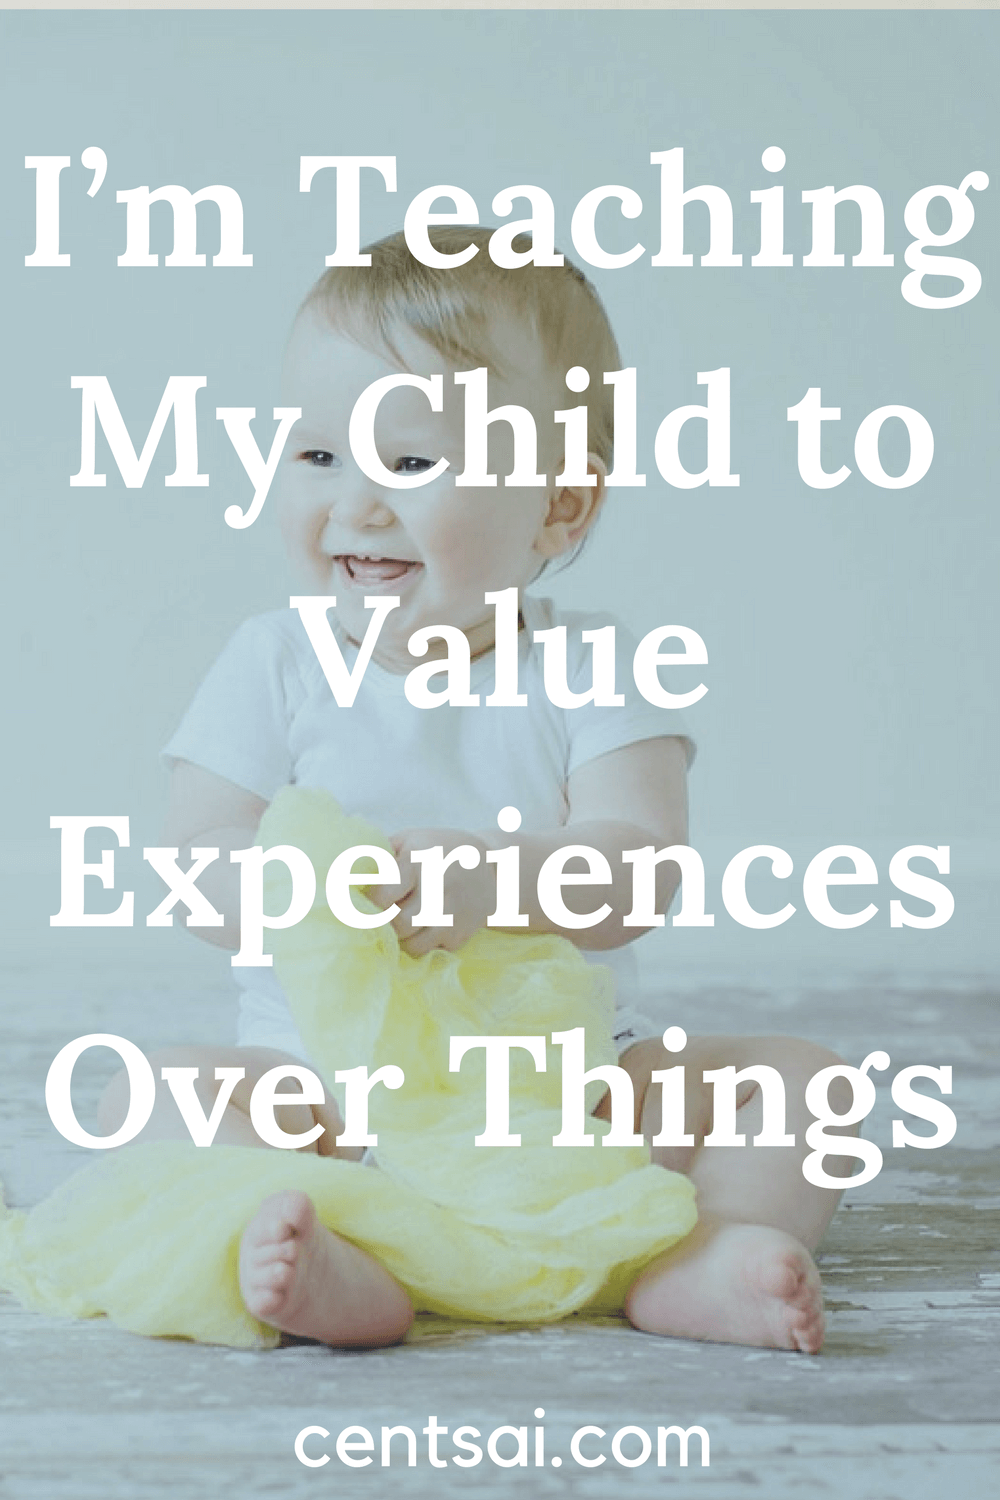 I’m Teaching My Child to Value Experiences Over Things